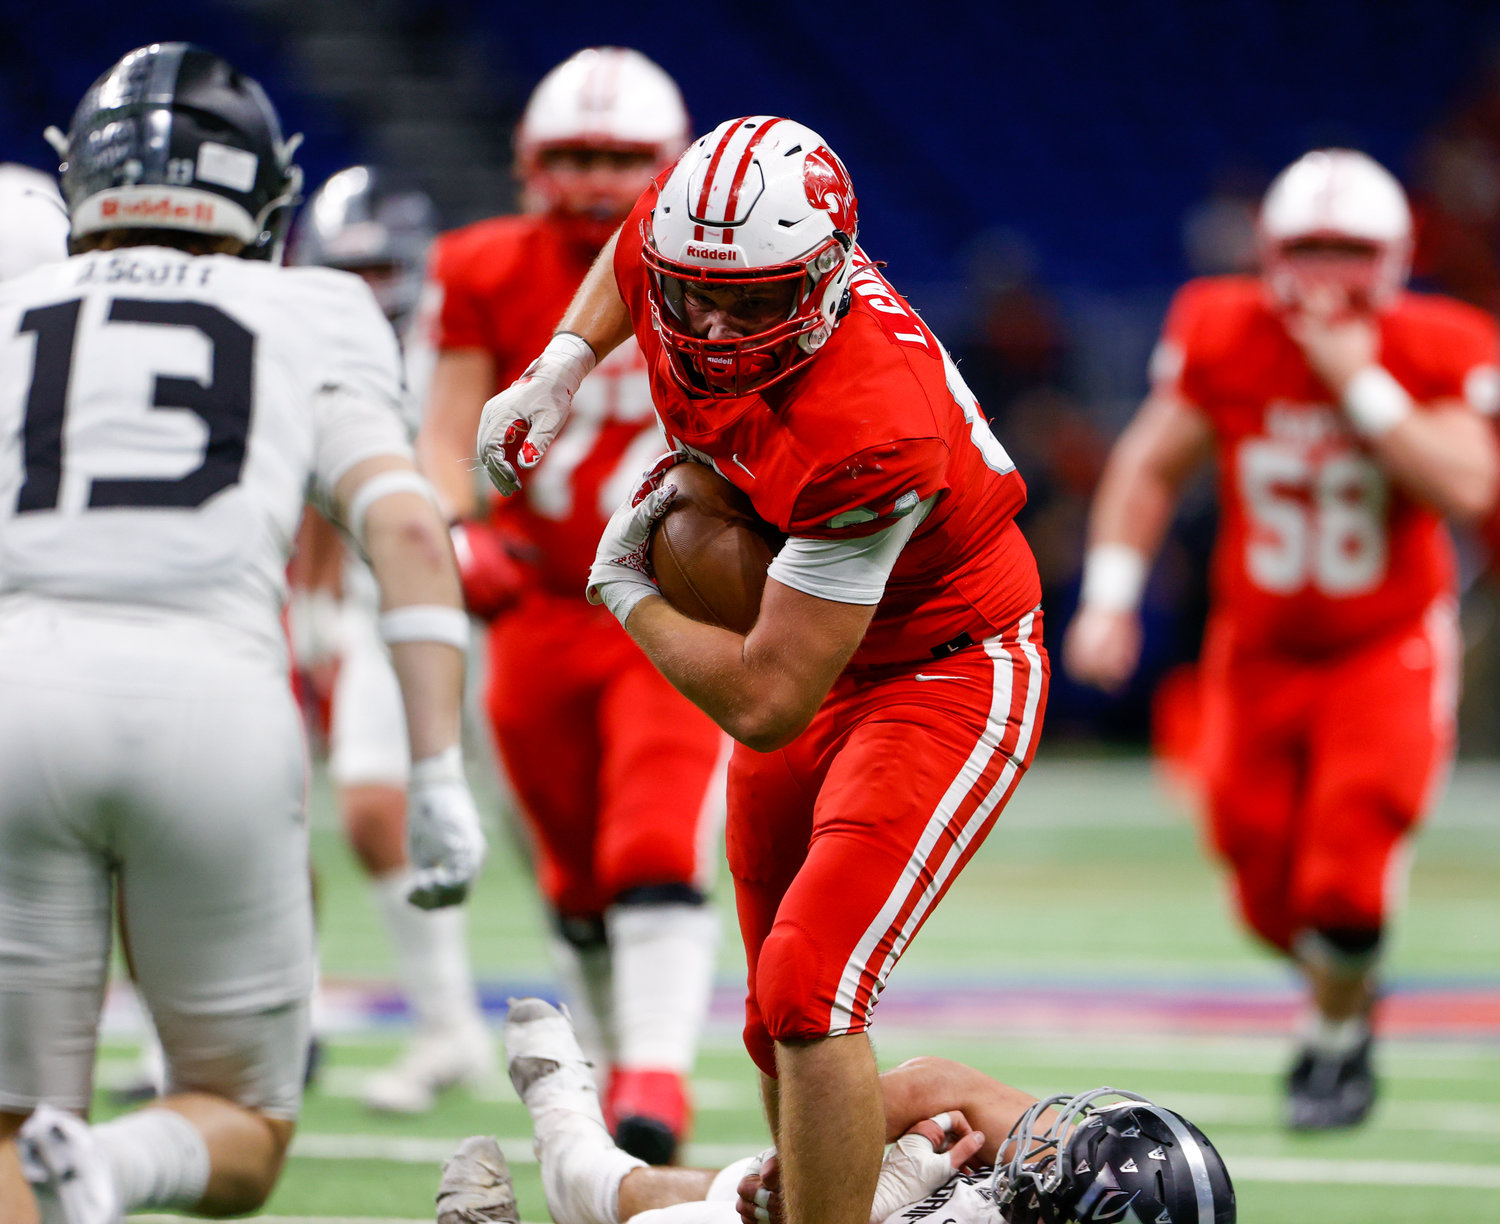 Katy tight end Luke Carter (84) carries the ball after a catch for a first down during the Class 6A-DII state semifinal football game between Katy and Vandegrift on Dec. 10, 2022 in San Antonio.